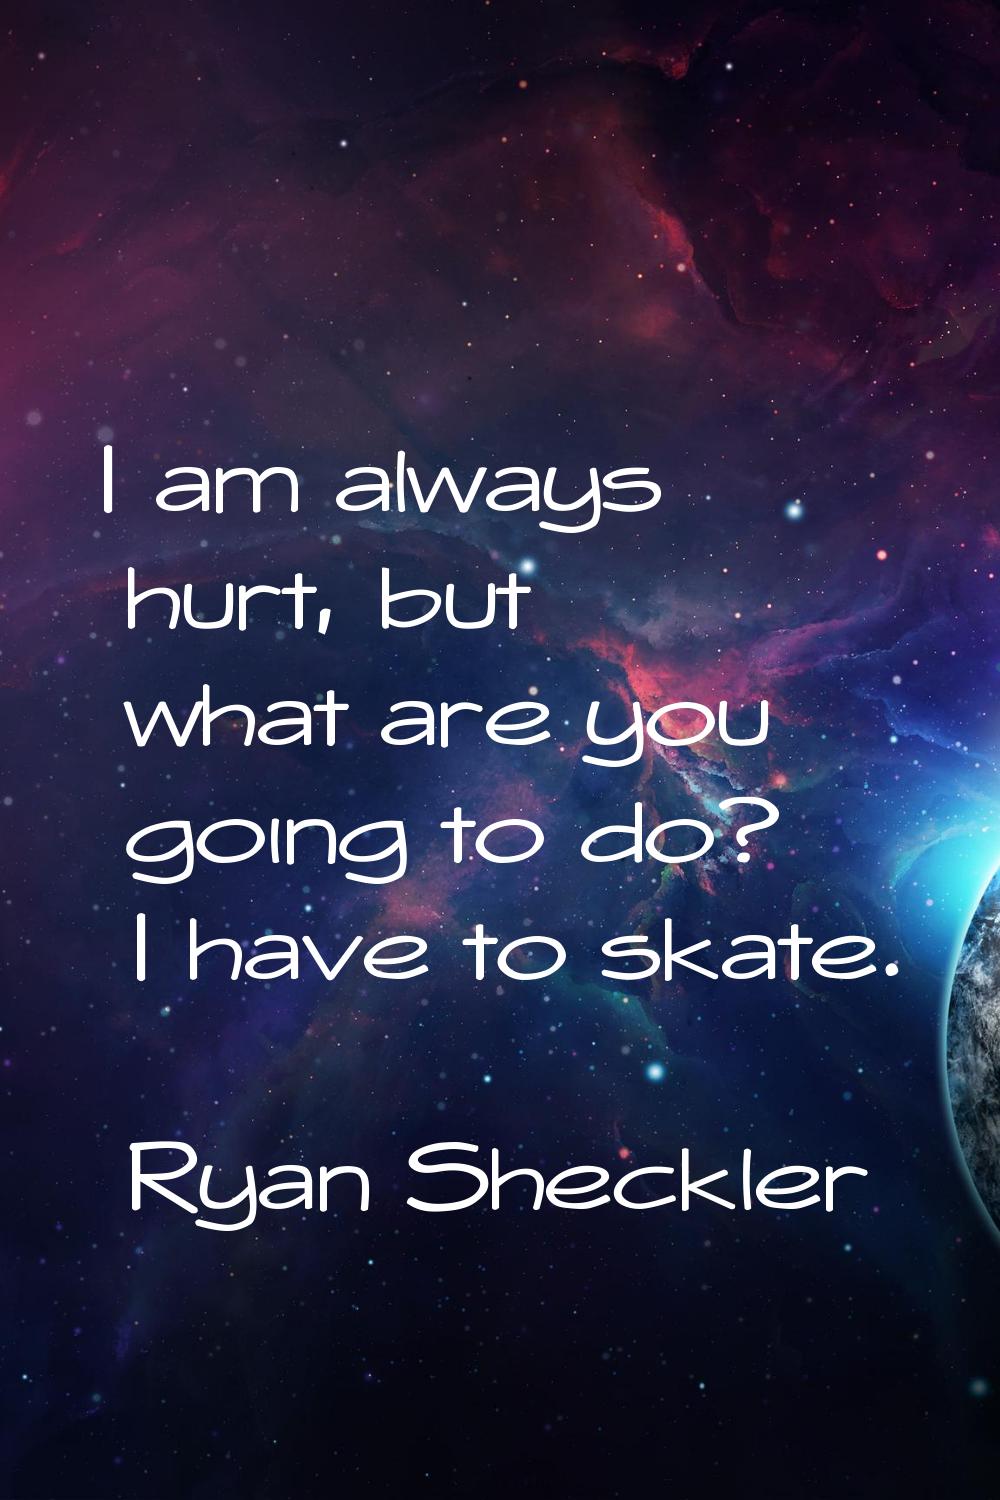 I am always hurt, but what are you going to do? I have to skate.